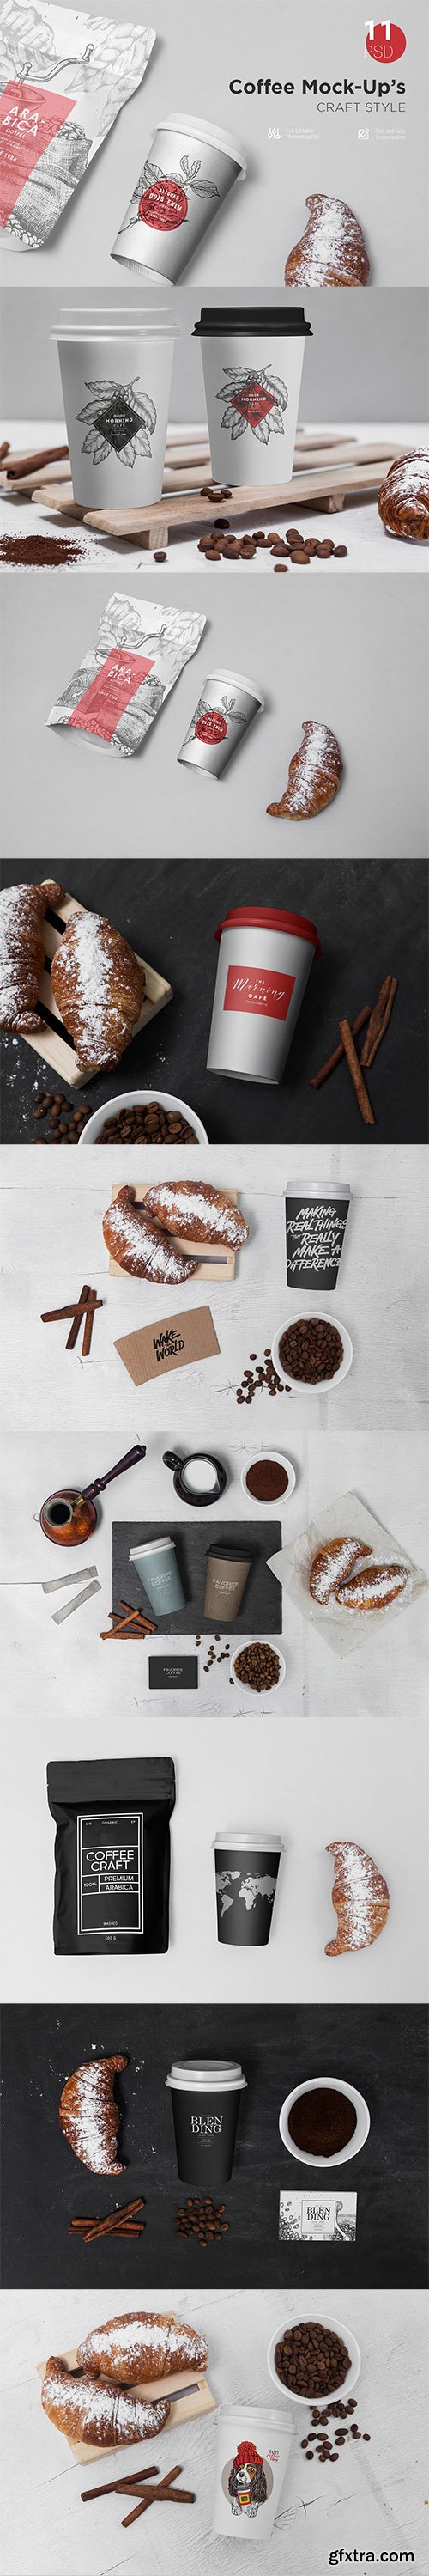 Coffee Mock-Up's Craft Style